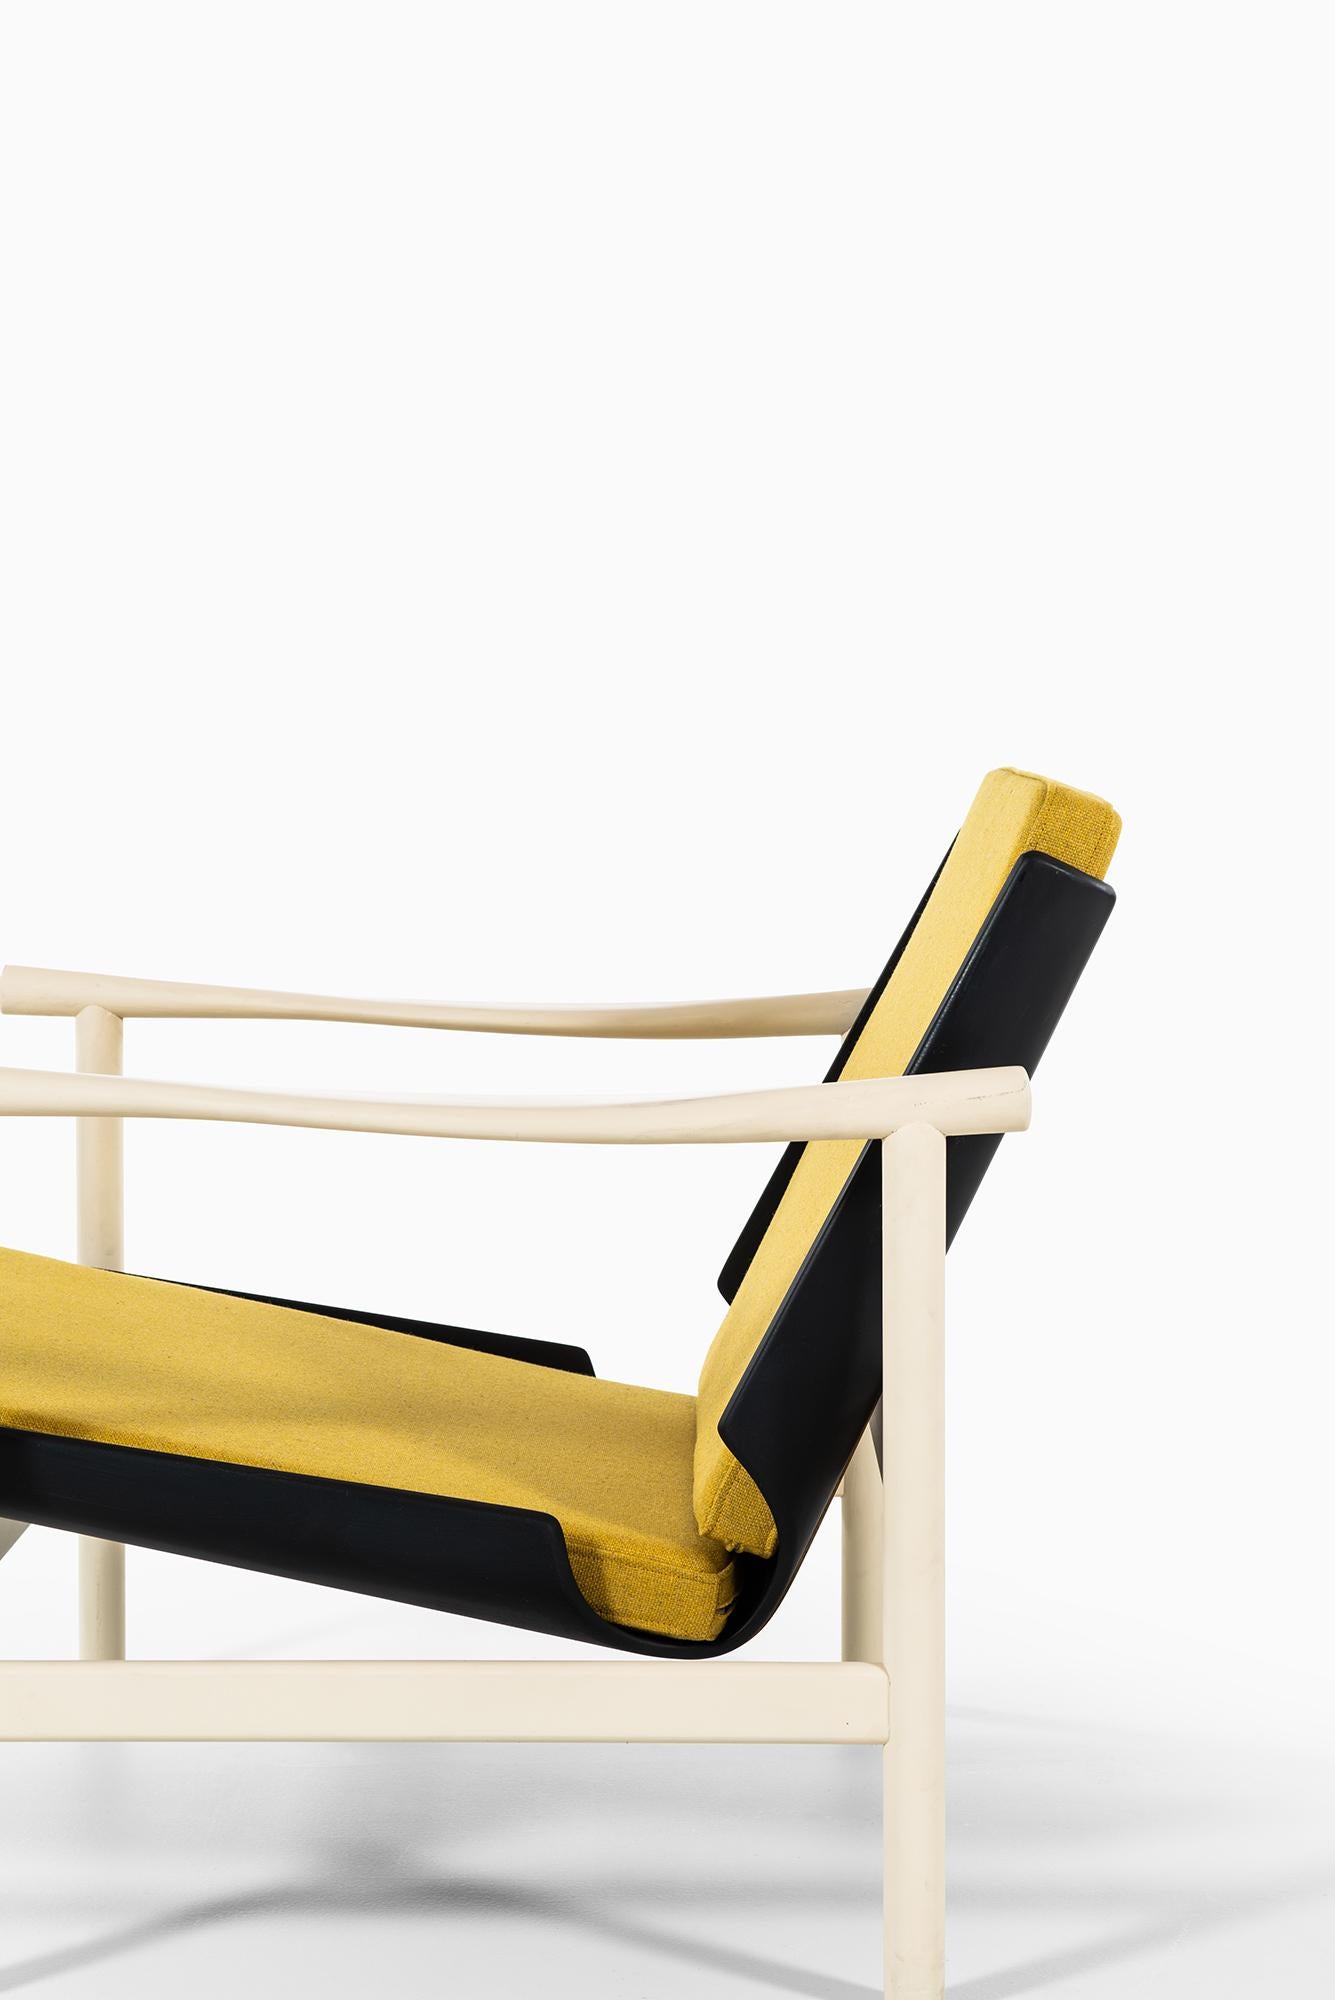 Danish Pair of easy chairs in white and black lacquered wood produced in Denmark For Sale